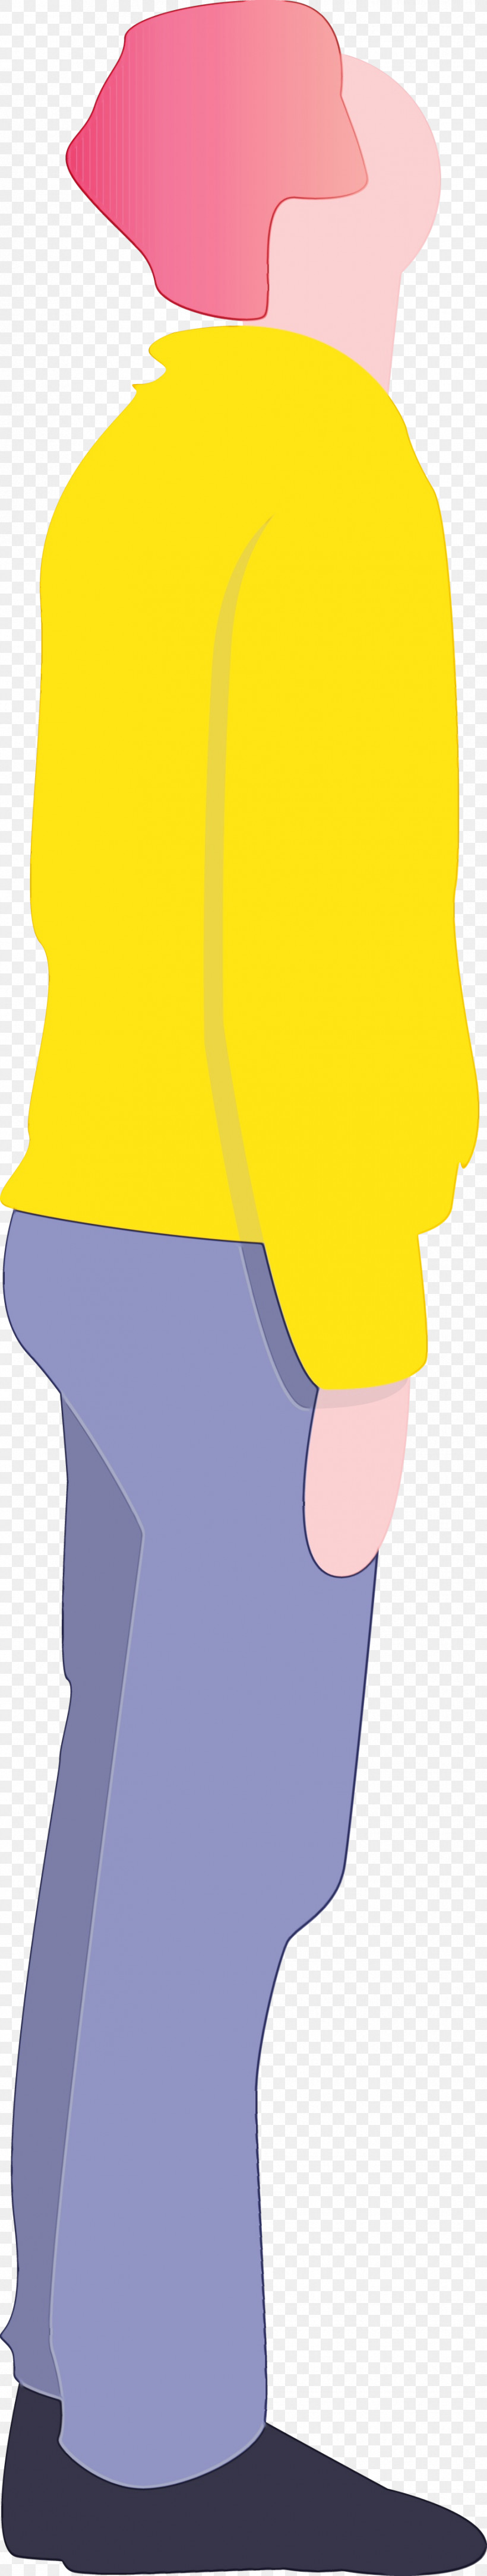 Yellow Clothing Shorts Joint Leggings, PNG, 915x4843px, Man Looking Up, Clothing, Electric Blue, Jacket, Joint Download Free